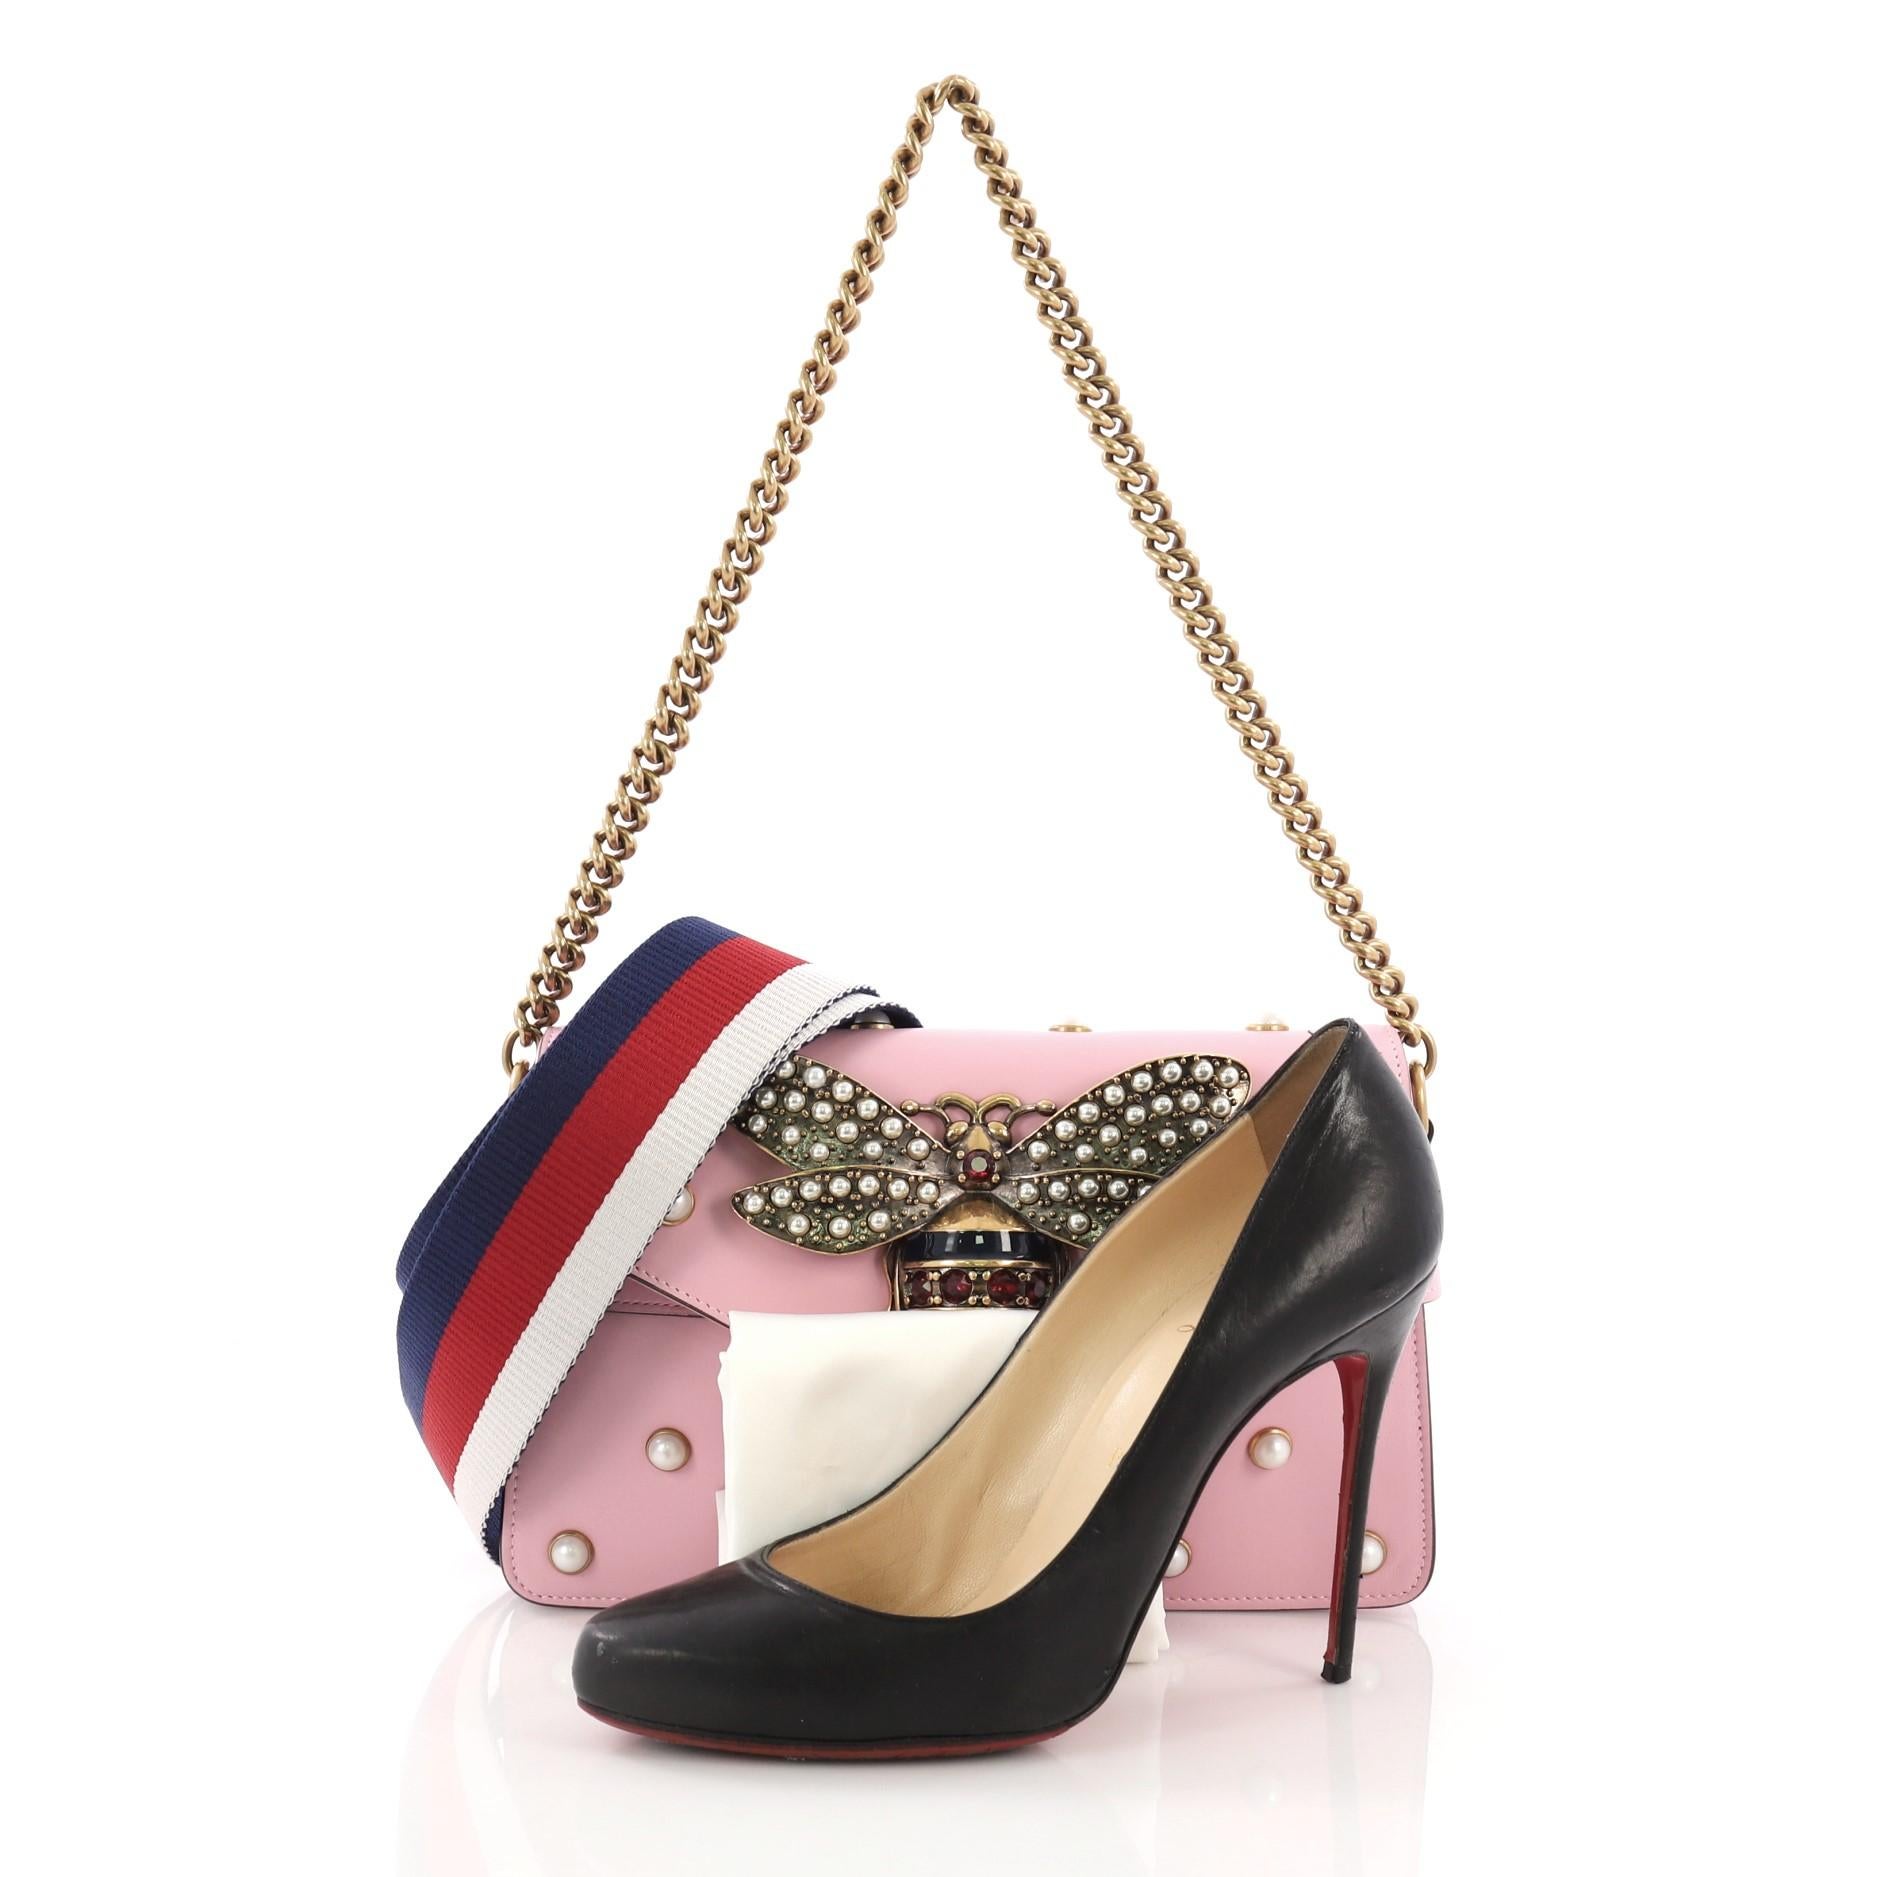 This Gucci Broadway Pearly Bee Shoulder Bag Embellished Leather Mini, crafted from pink embellished leather, features chain link strap, multiple pearl studs, metal bee design, and aged-gold tone hardware. Its magnetic snap closure opens to a nude